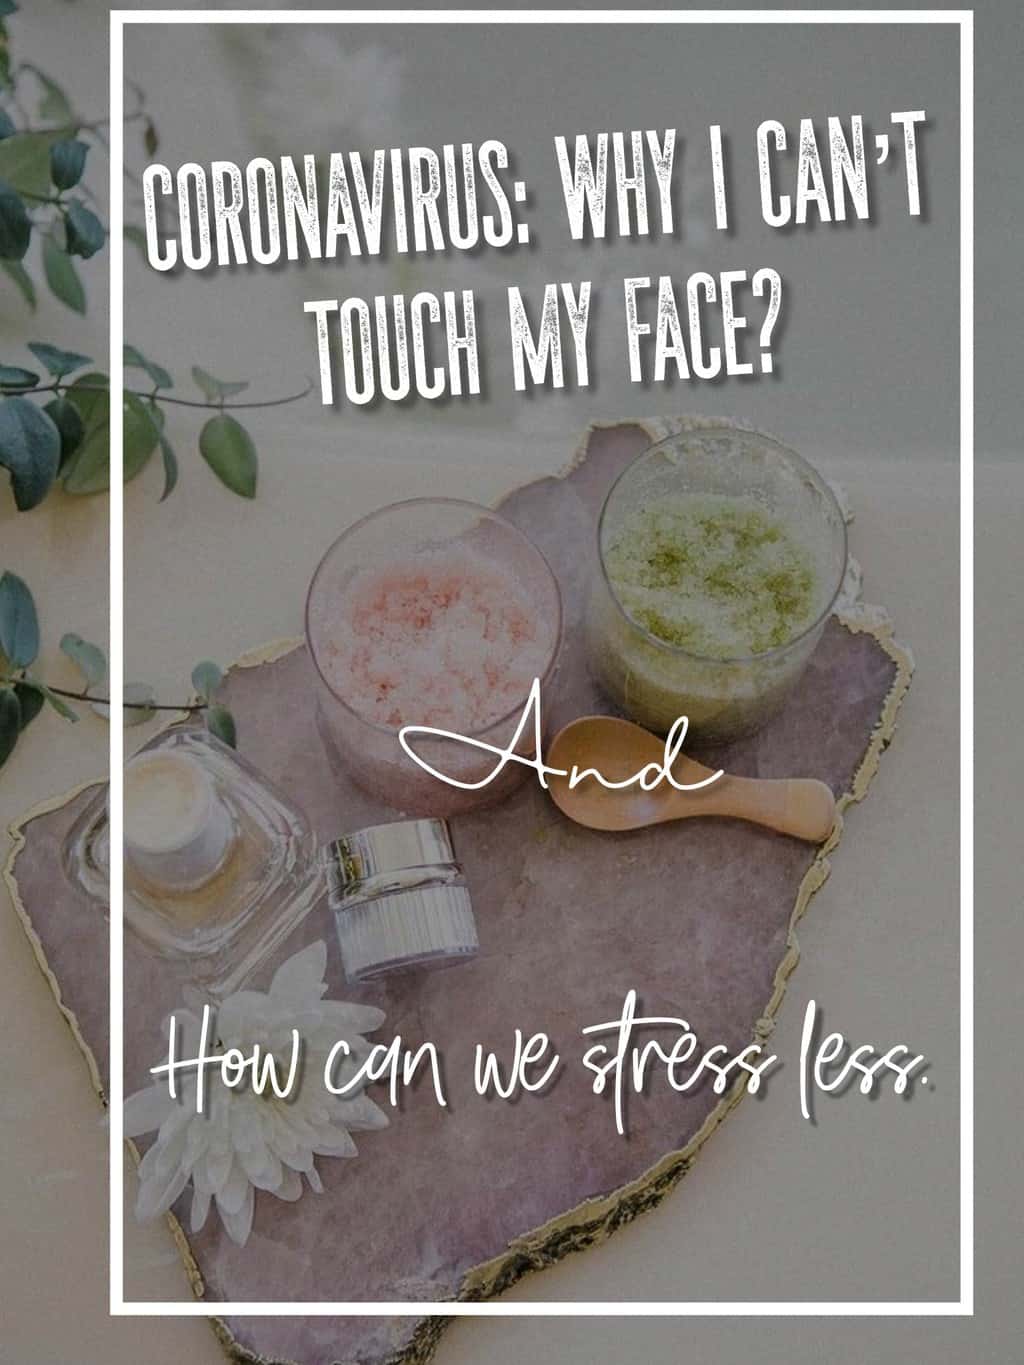 Coronavirus: Why I can’t touch my face?